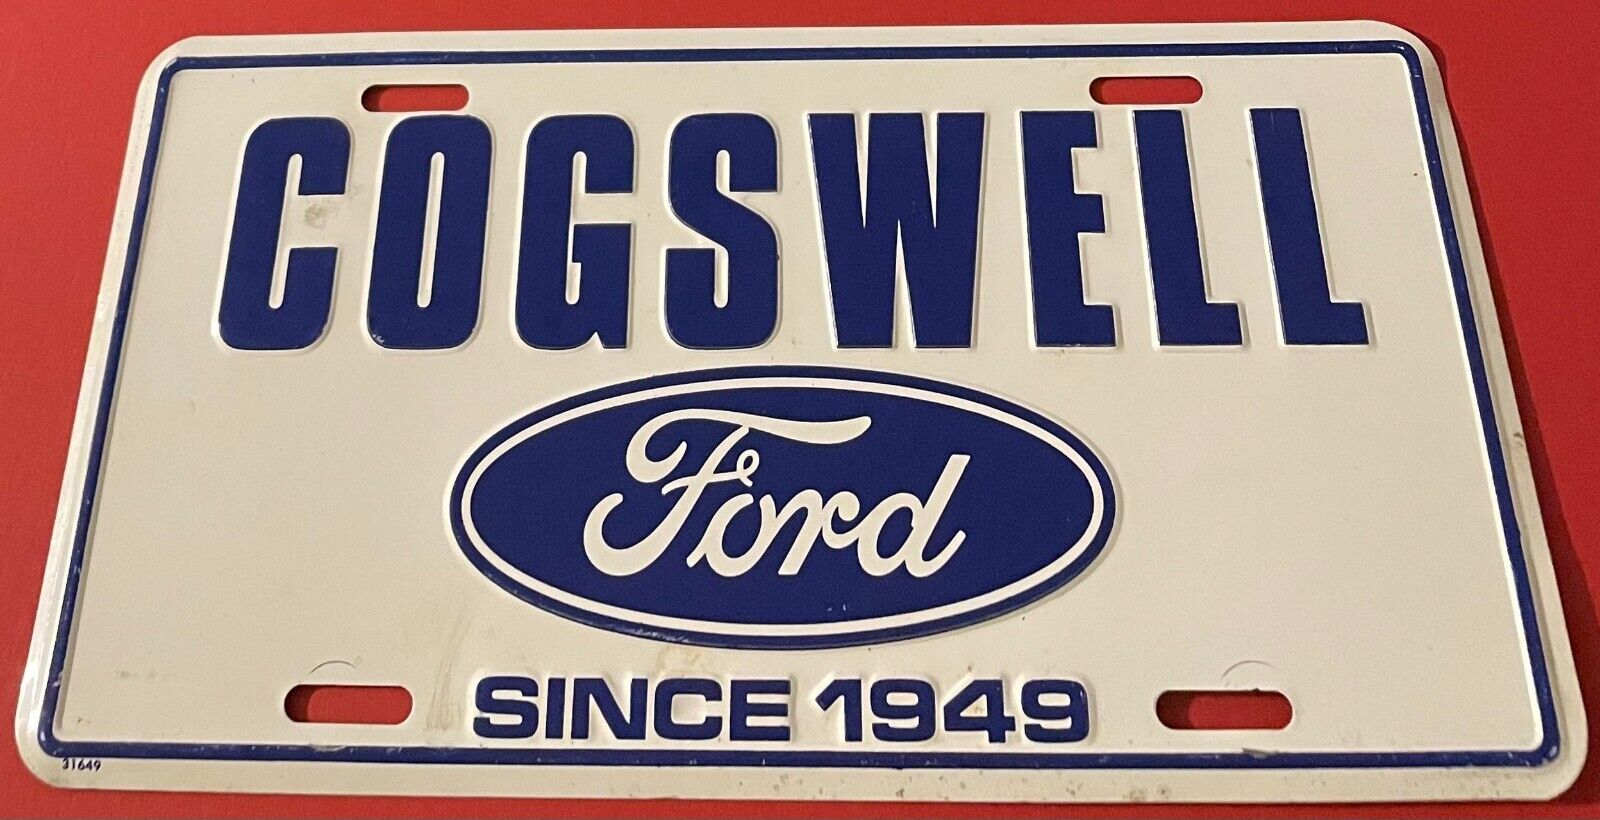 Cogswell Ford Since 1949 Dealership Booster License Plate Russellville Arkansas